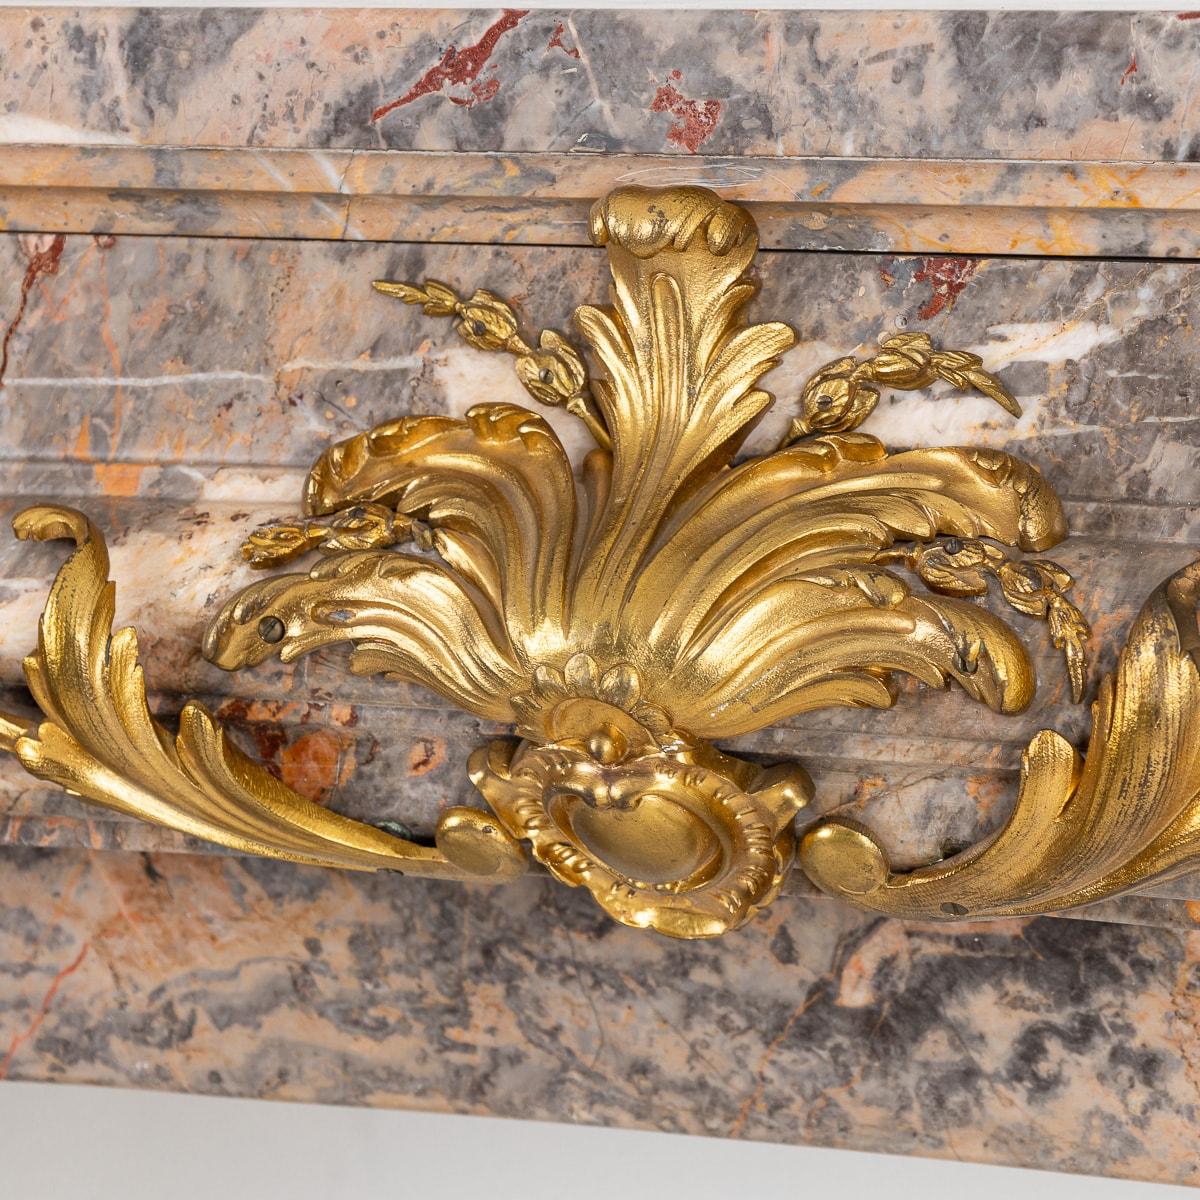 Antique 19th Century French Ormolu Mounted Caravaggio Marble Fireplace c.1880 For Sale 1